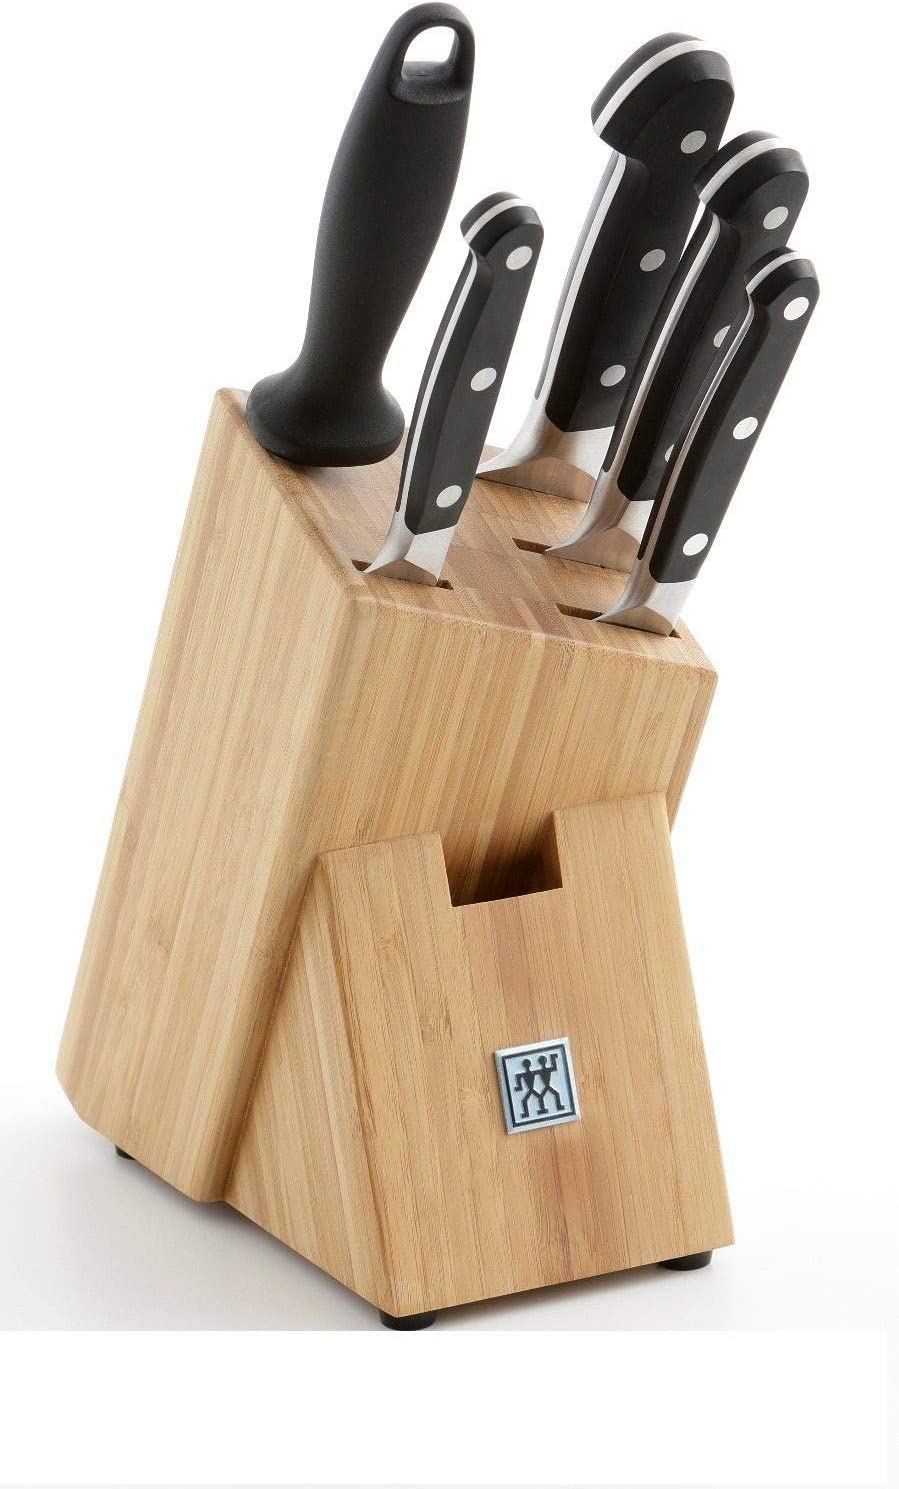 Zwilling Knife Block Pro 6 Pieces Stainless Steel Silver/Black 38 x 28 x 28 cm 6 Units